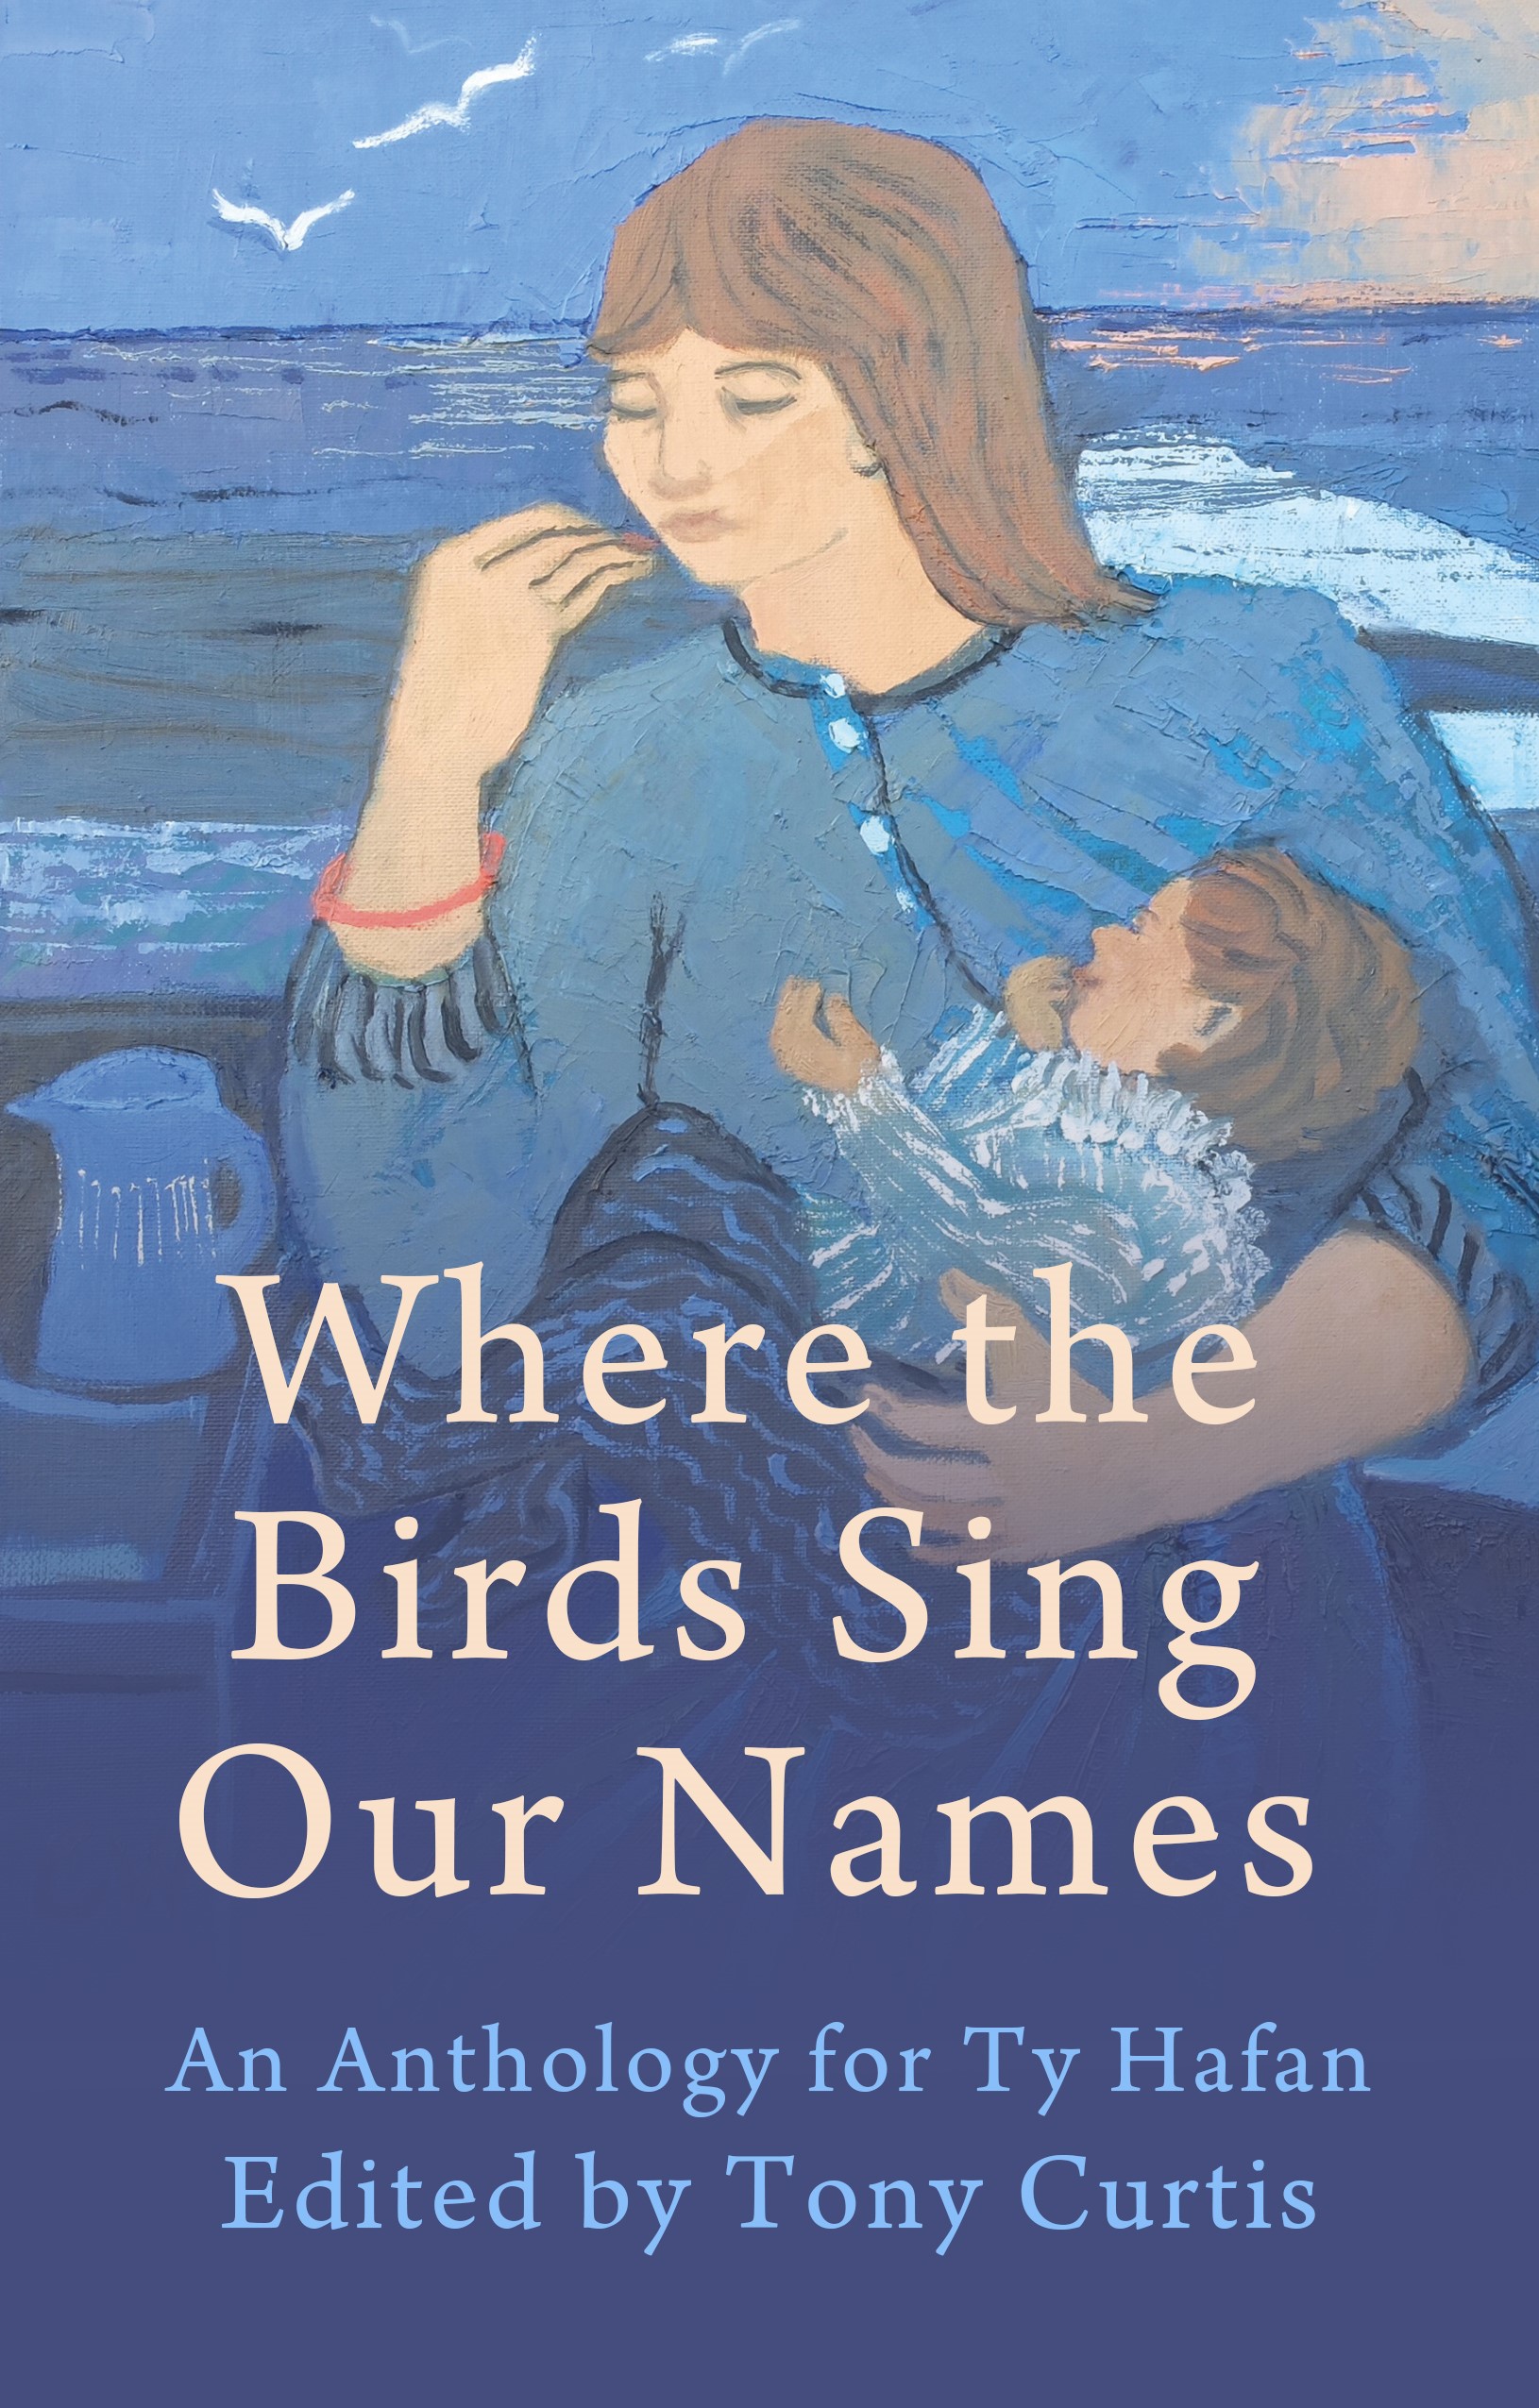 A book cover - a woman with brown hair, holds a young child in her arm whilst she eats a biscuit. The cover is handdrawn and very blue. The bottom half of the picture reads 'Where t he Birds Sing Our Names. An Anthology for Ty Hafan. Edited by Tony Curtis.